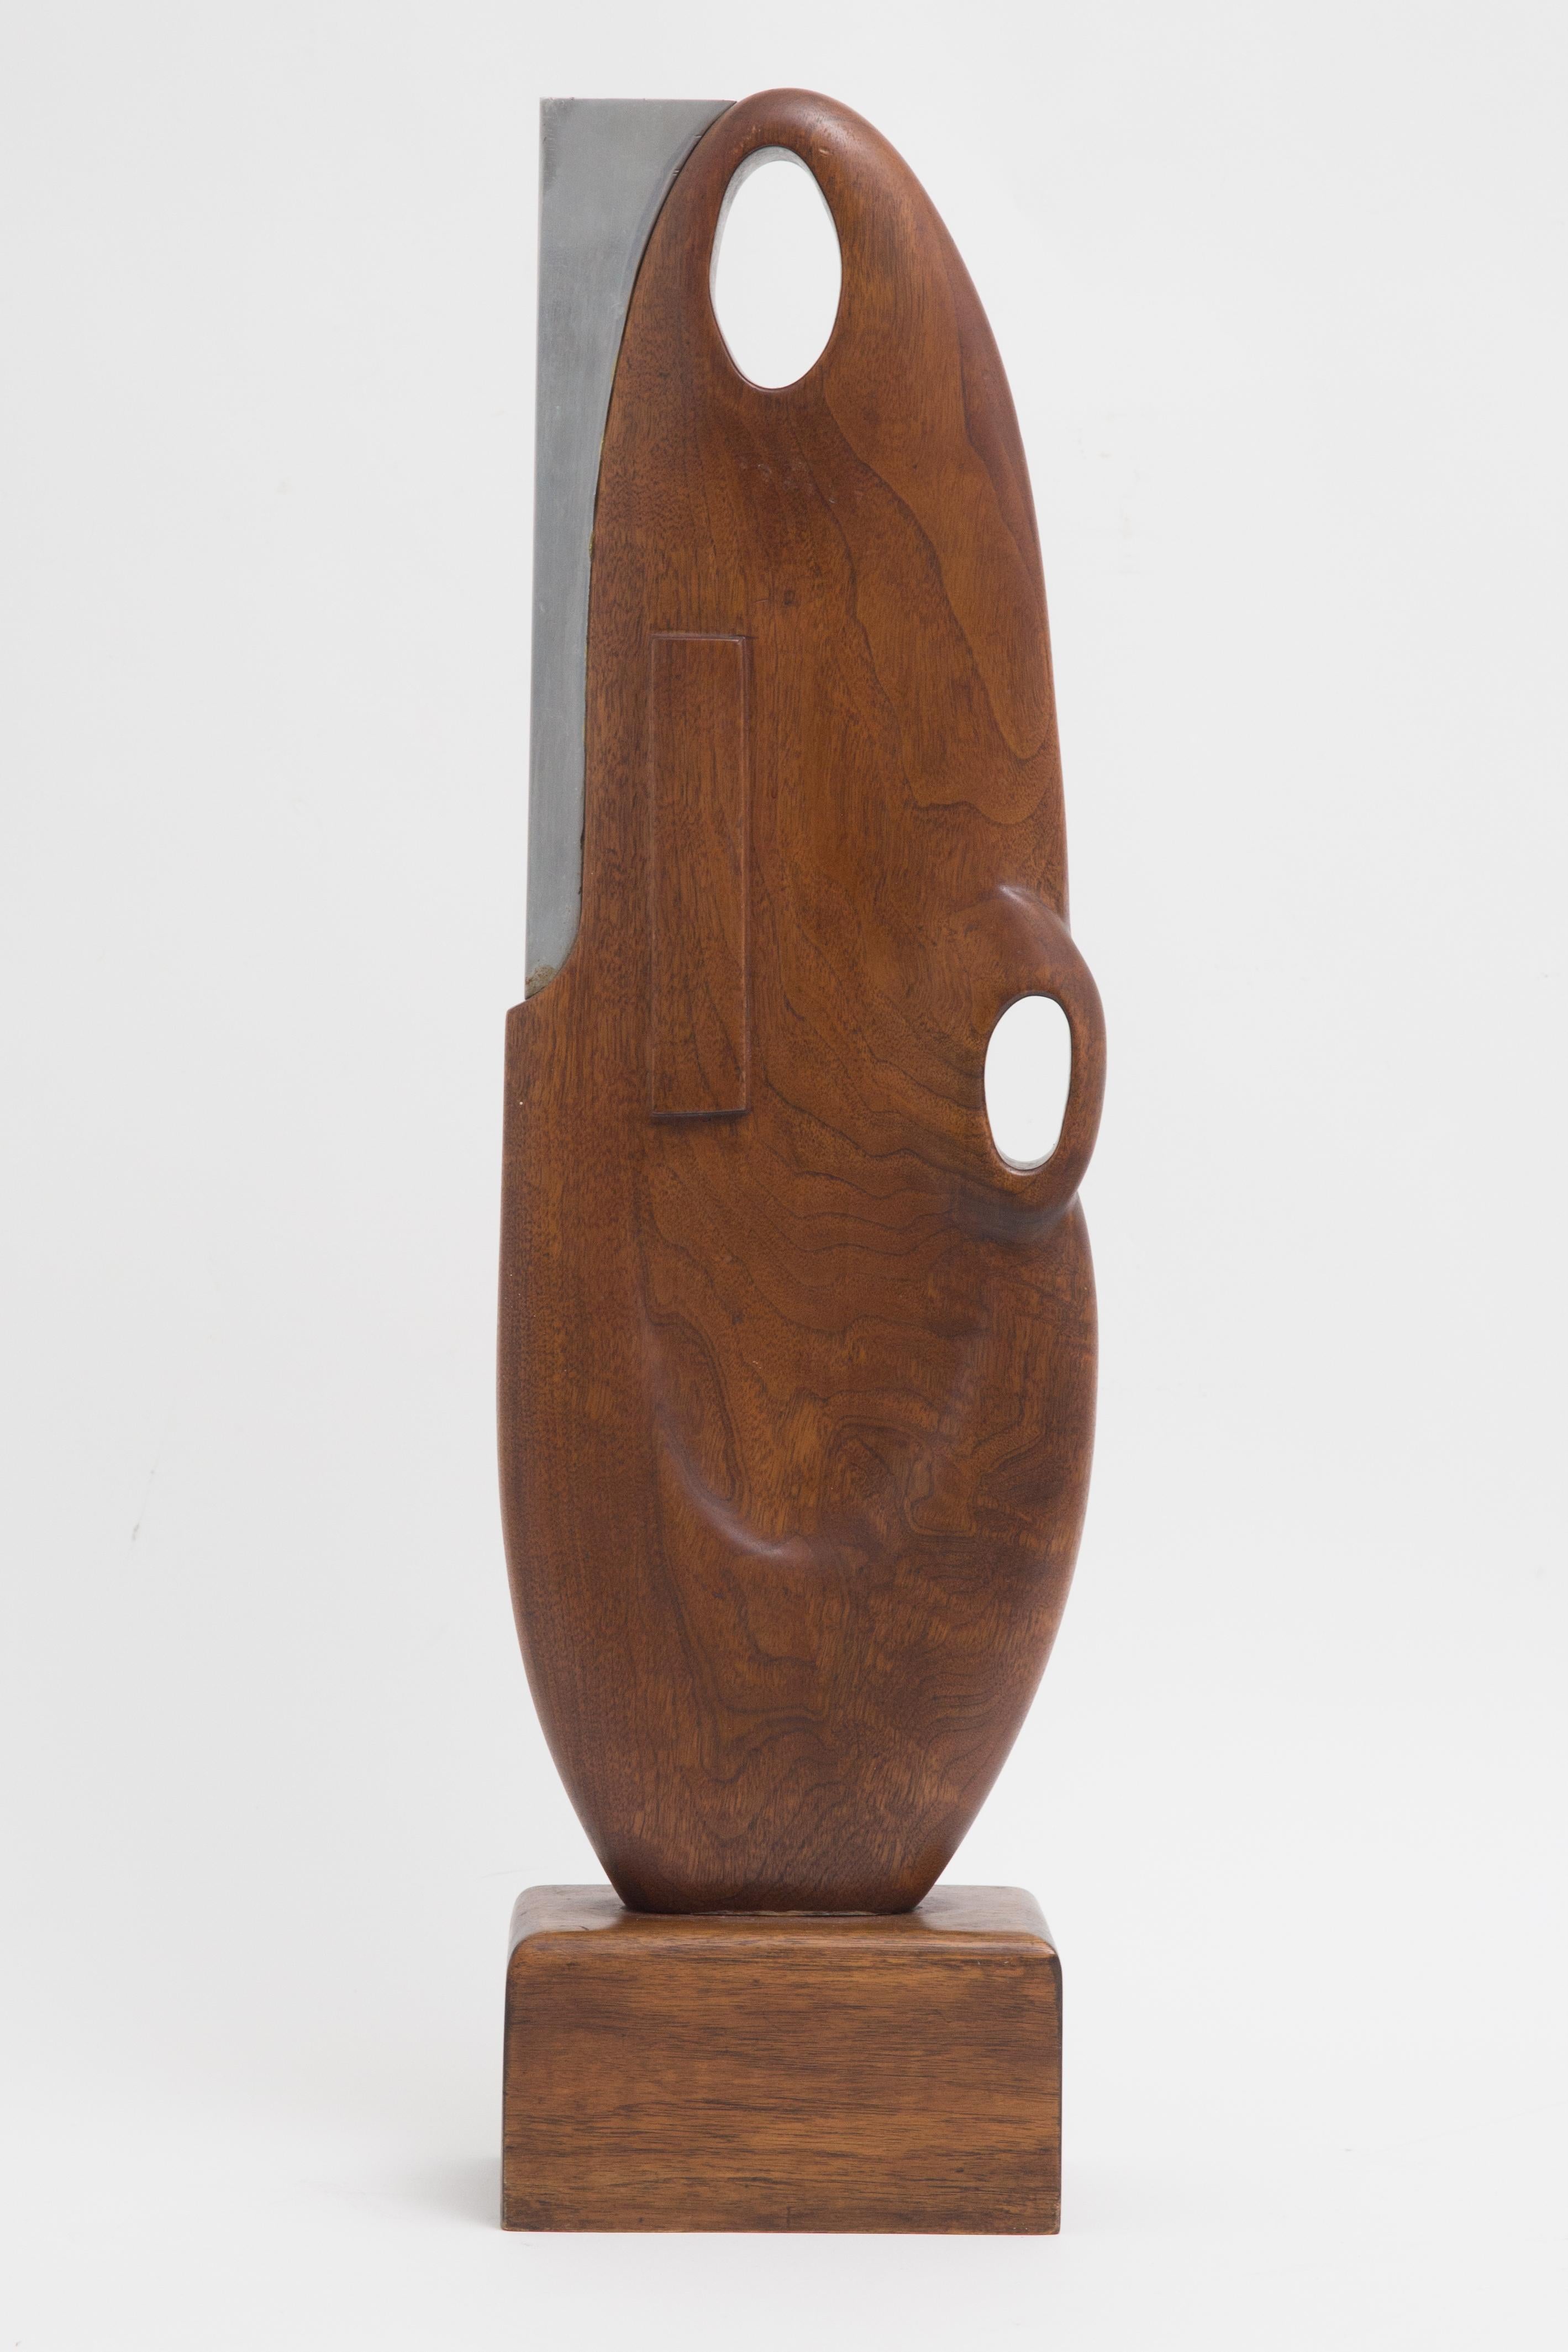 Offered is a Mid-Century Modern abstract wood and aluminum sculpture circa 1950 mounted on a wooden plinth/base. The work stands approximately 27” in height and bears a gallery/exhibition label on the bottom of the mounting. The label has faded and